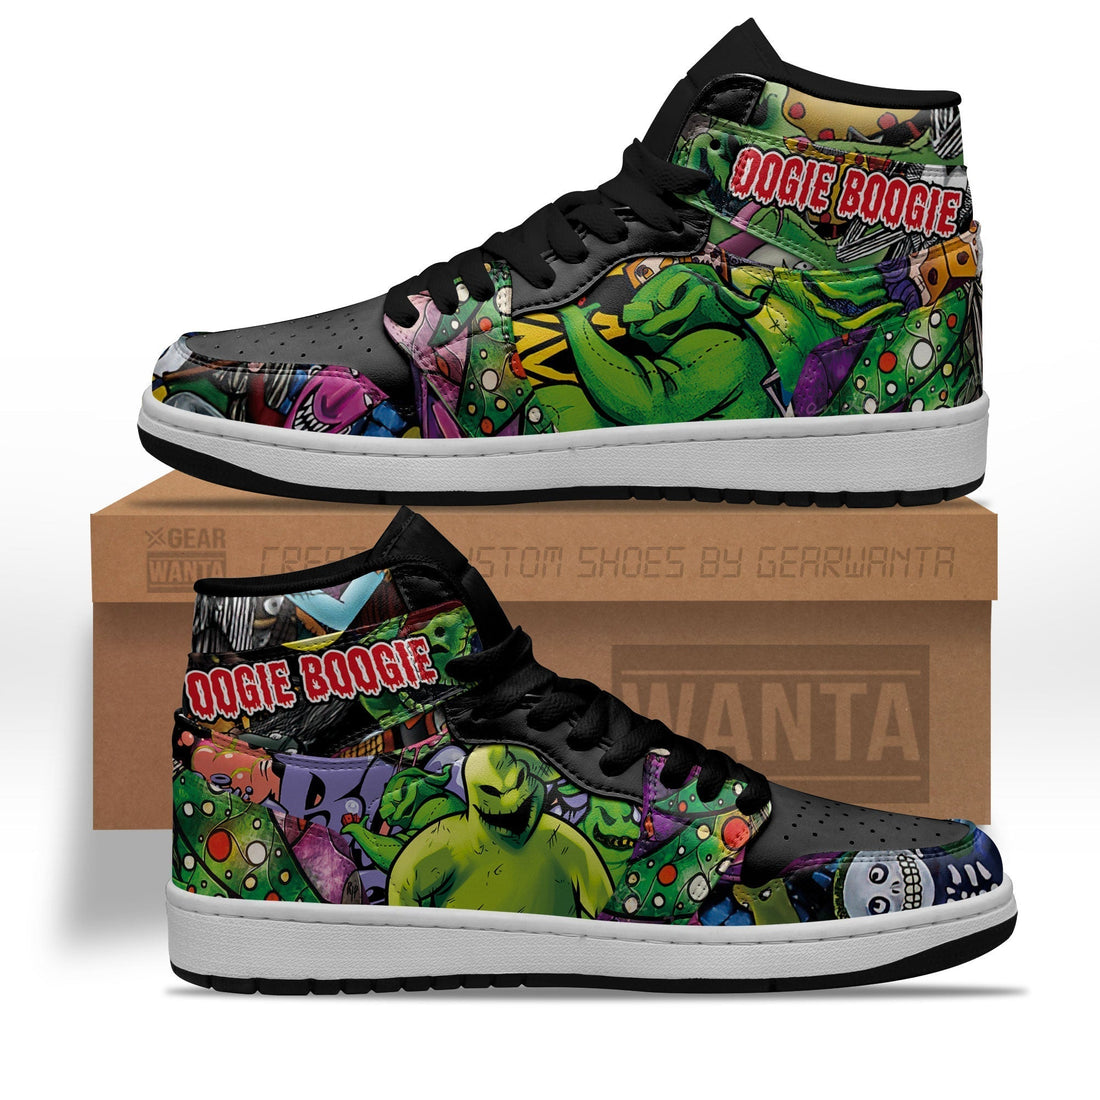 Oogie Boogie Shoes Custom For The Nightmare Before Christmas Fans-Gear Wanta